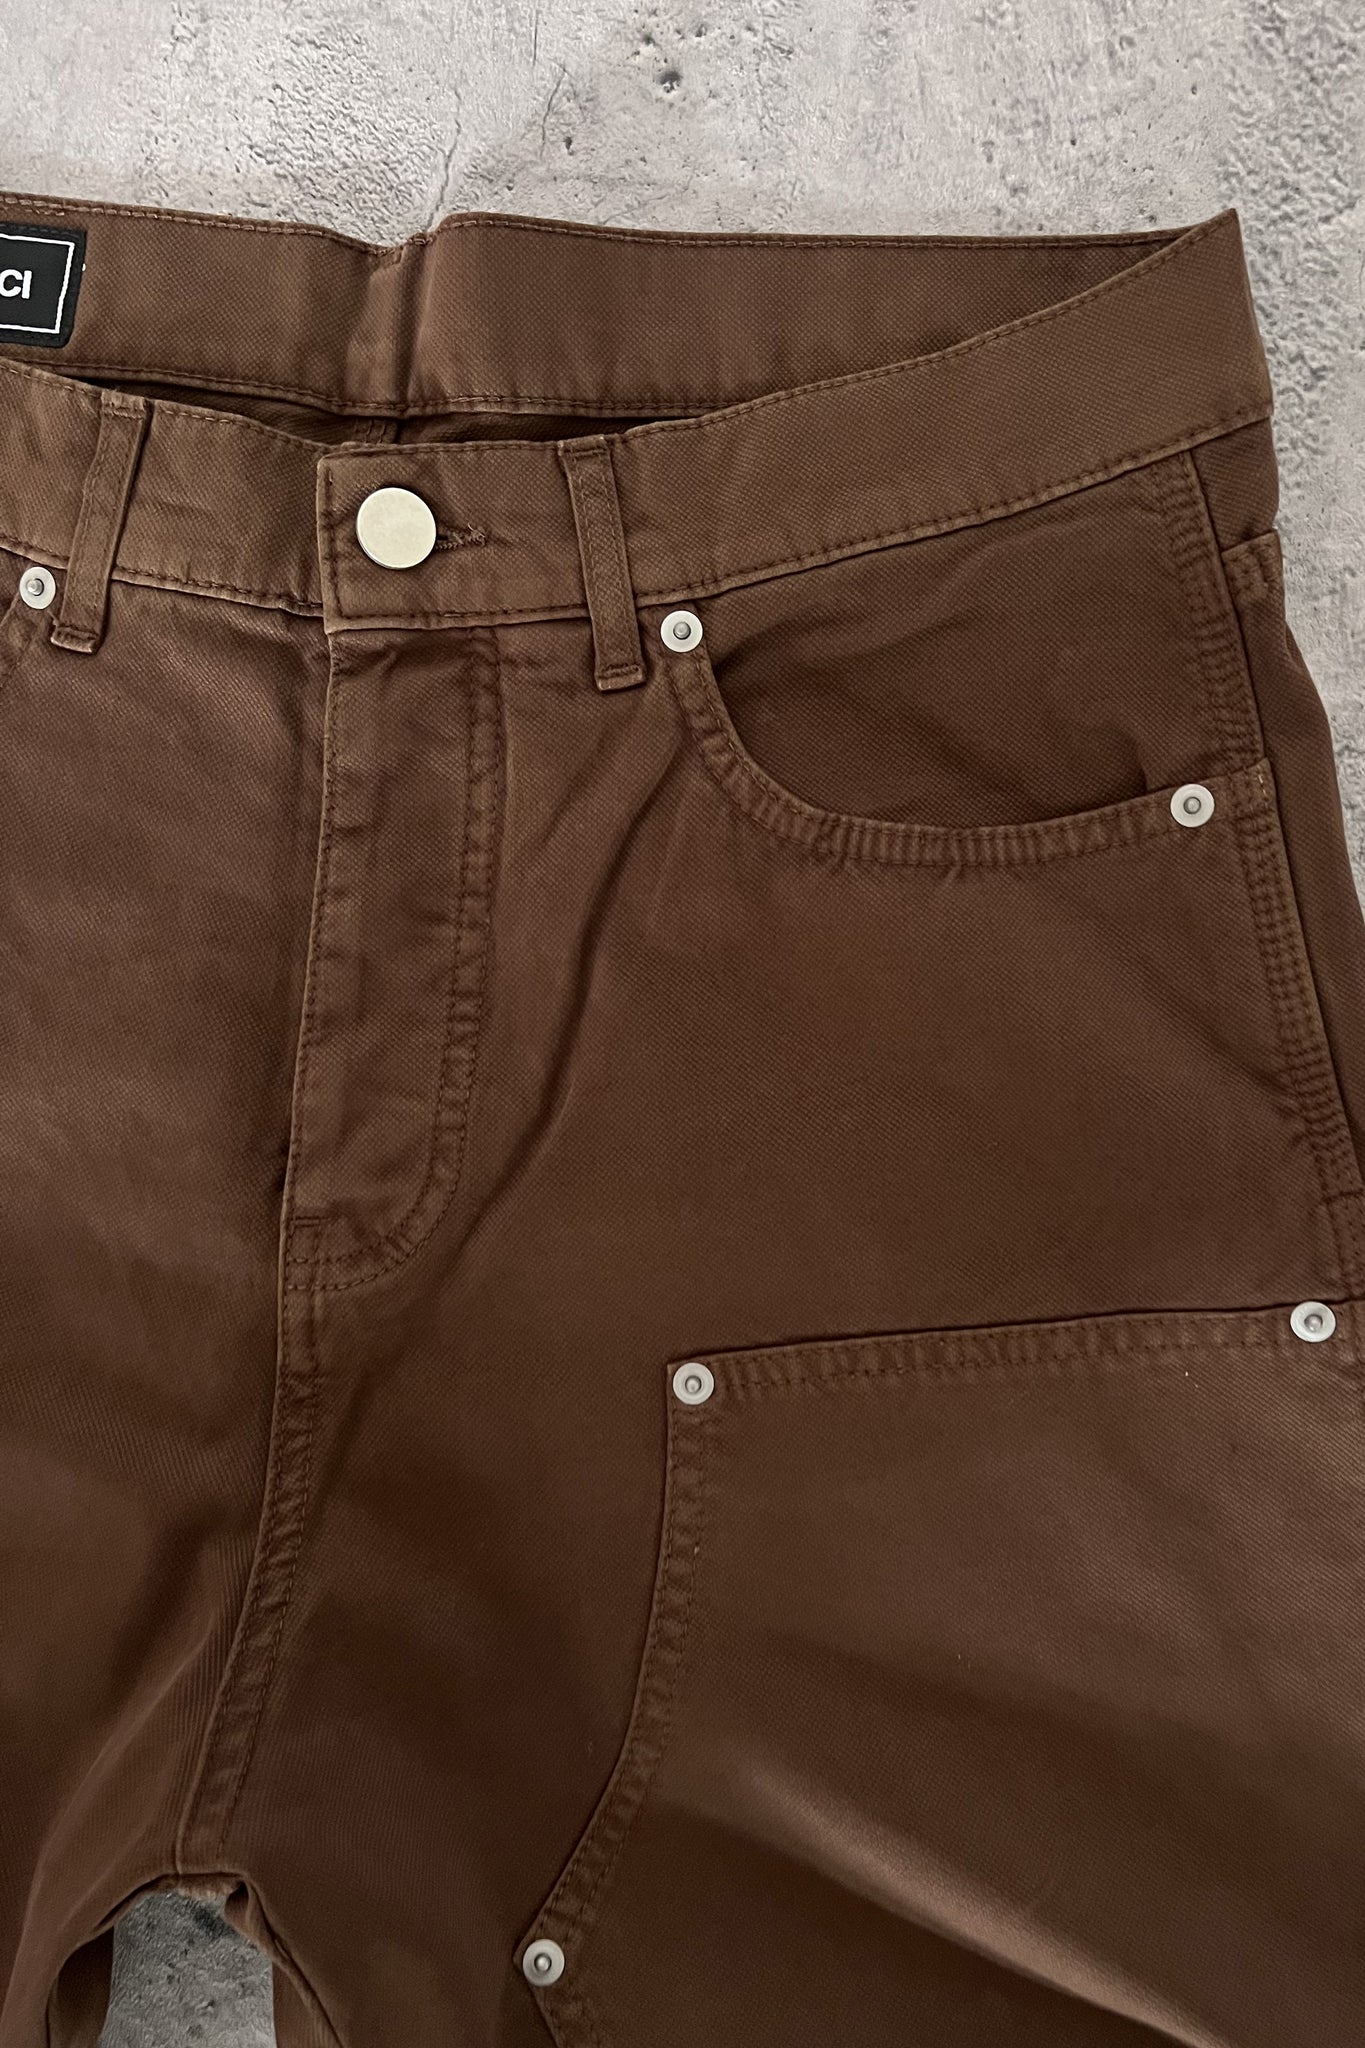 Carpenter Pants "LIMITED EDITION" Brown 